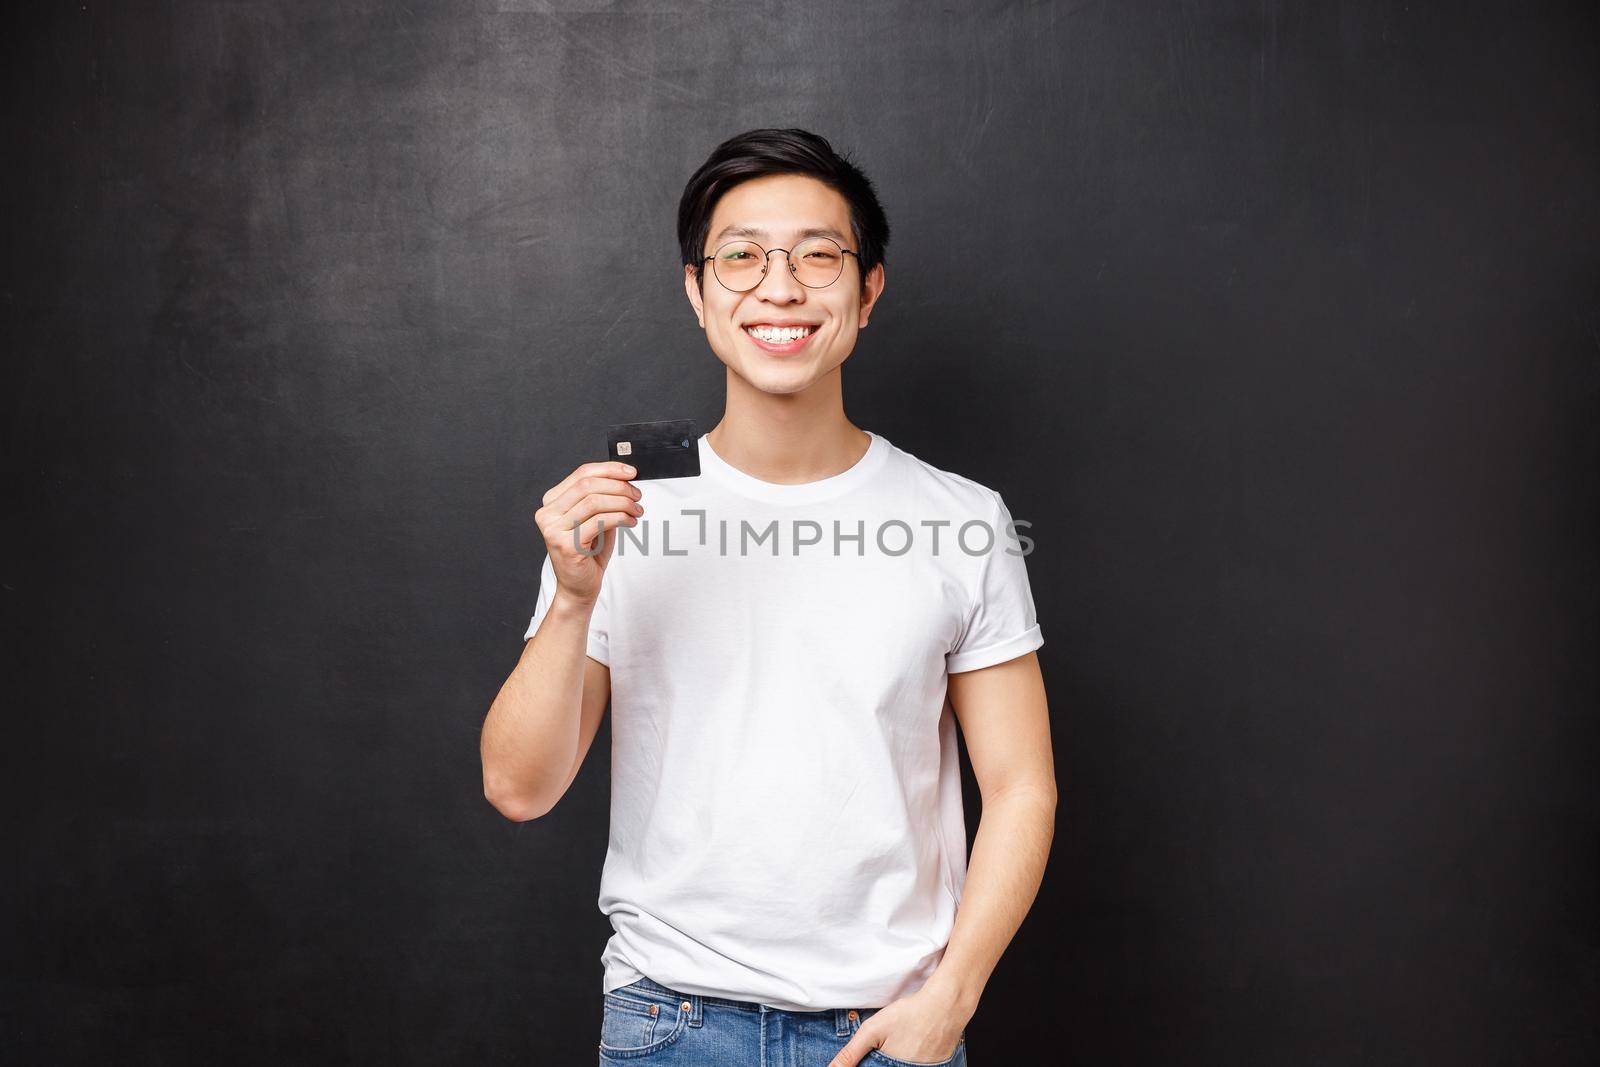 Bank, finance and payment concept. Portrait of satisfied charismatic asian guy in t-shirt and glasses, recommend put money on deposit, pleased with banking service, hold credit card and smiling.